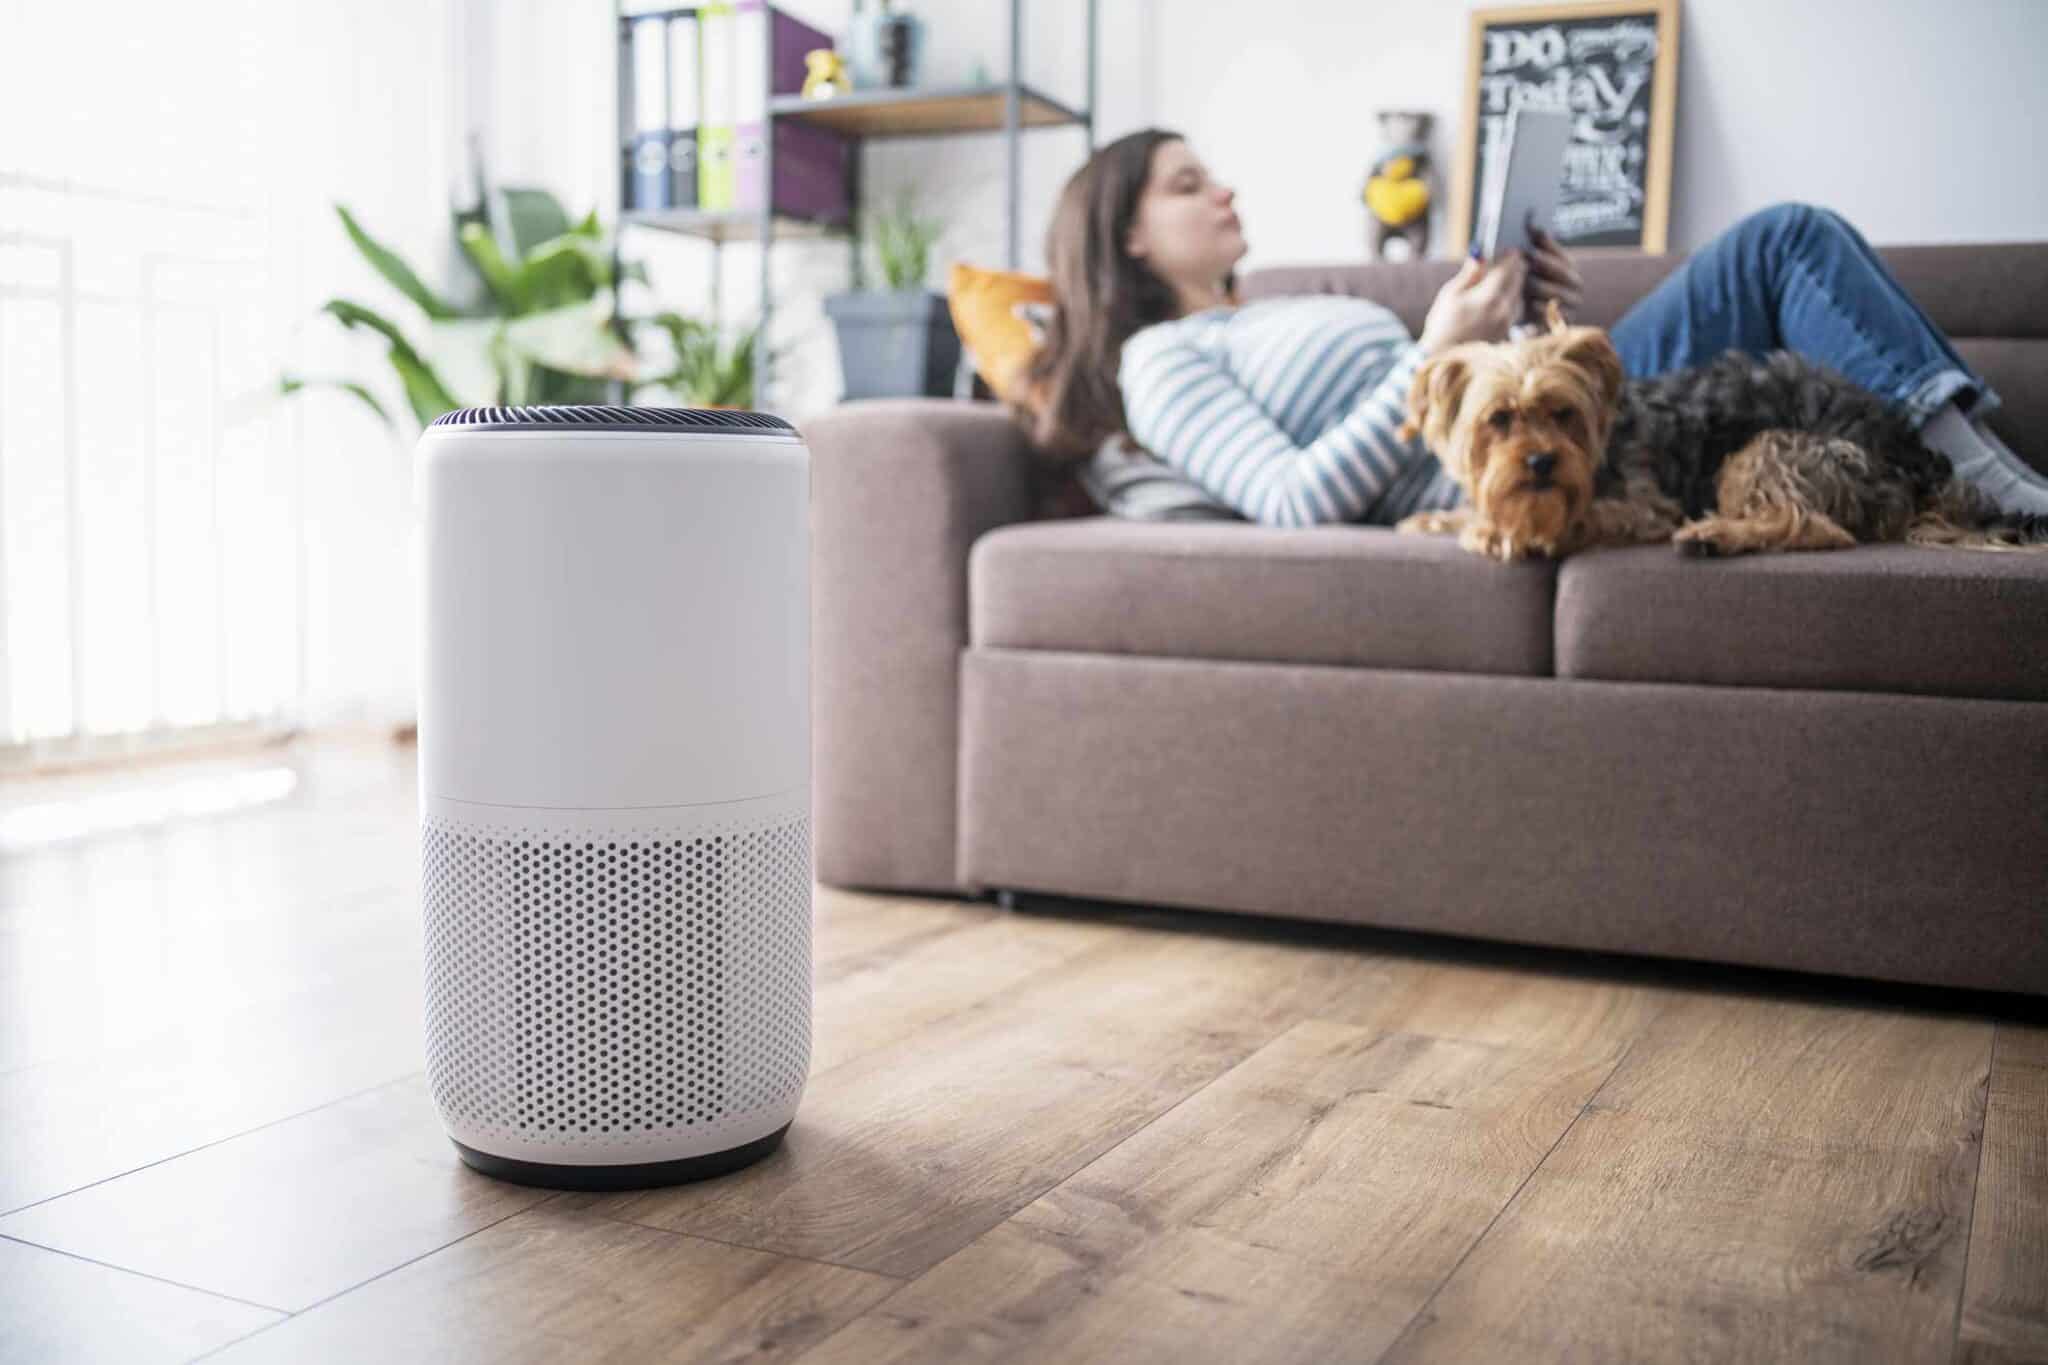 Top Air Purifiers For Your Home: What Are The Benefits Of Using An Air Purifier? - Healthsoothe